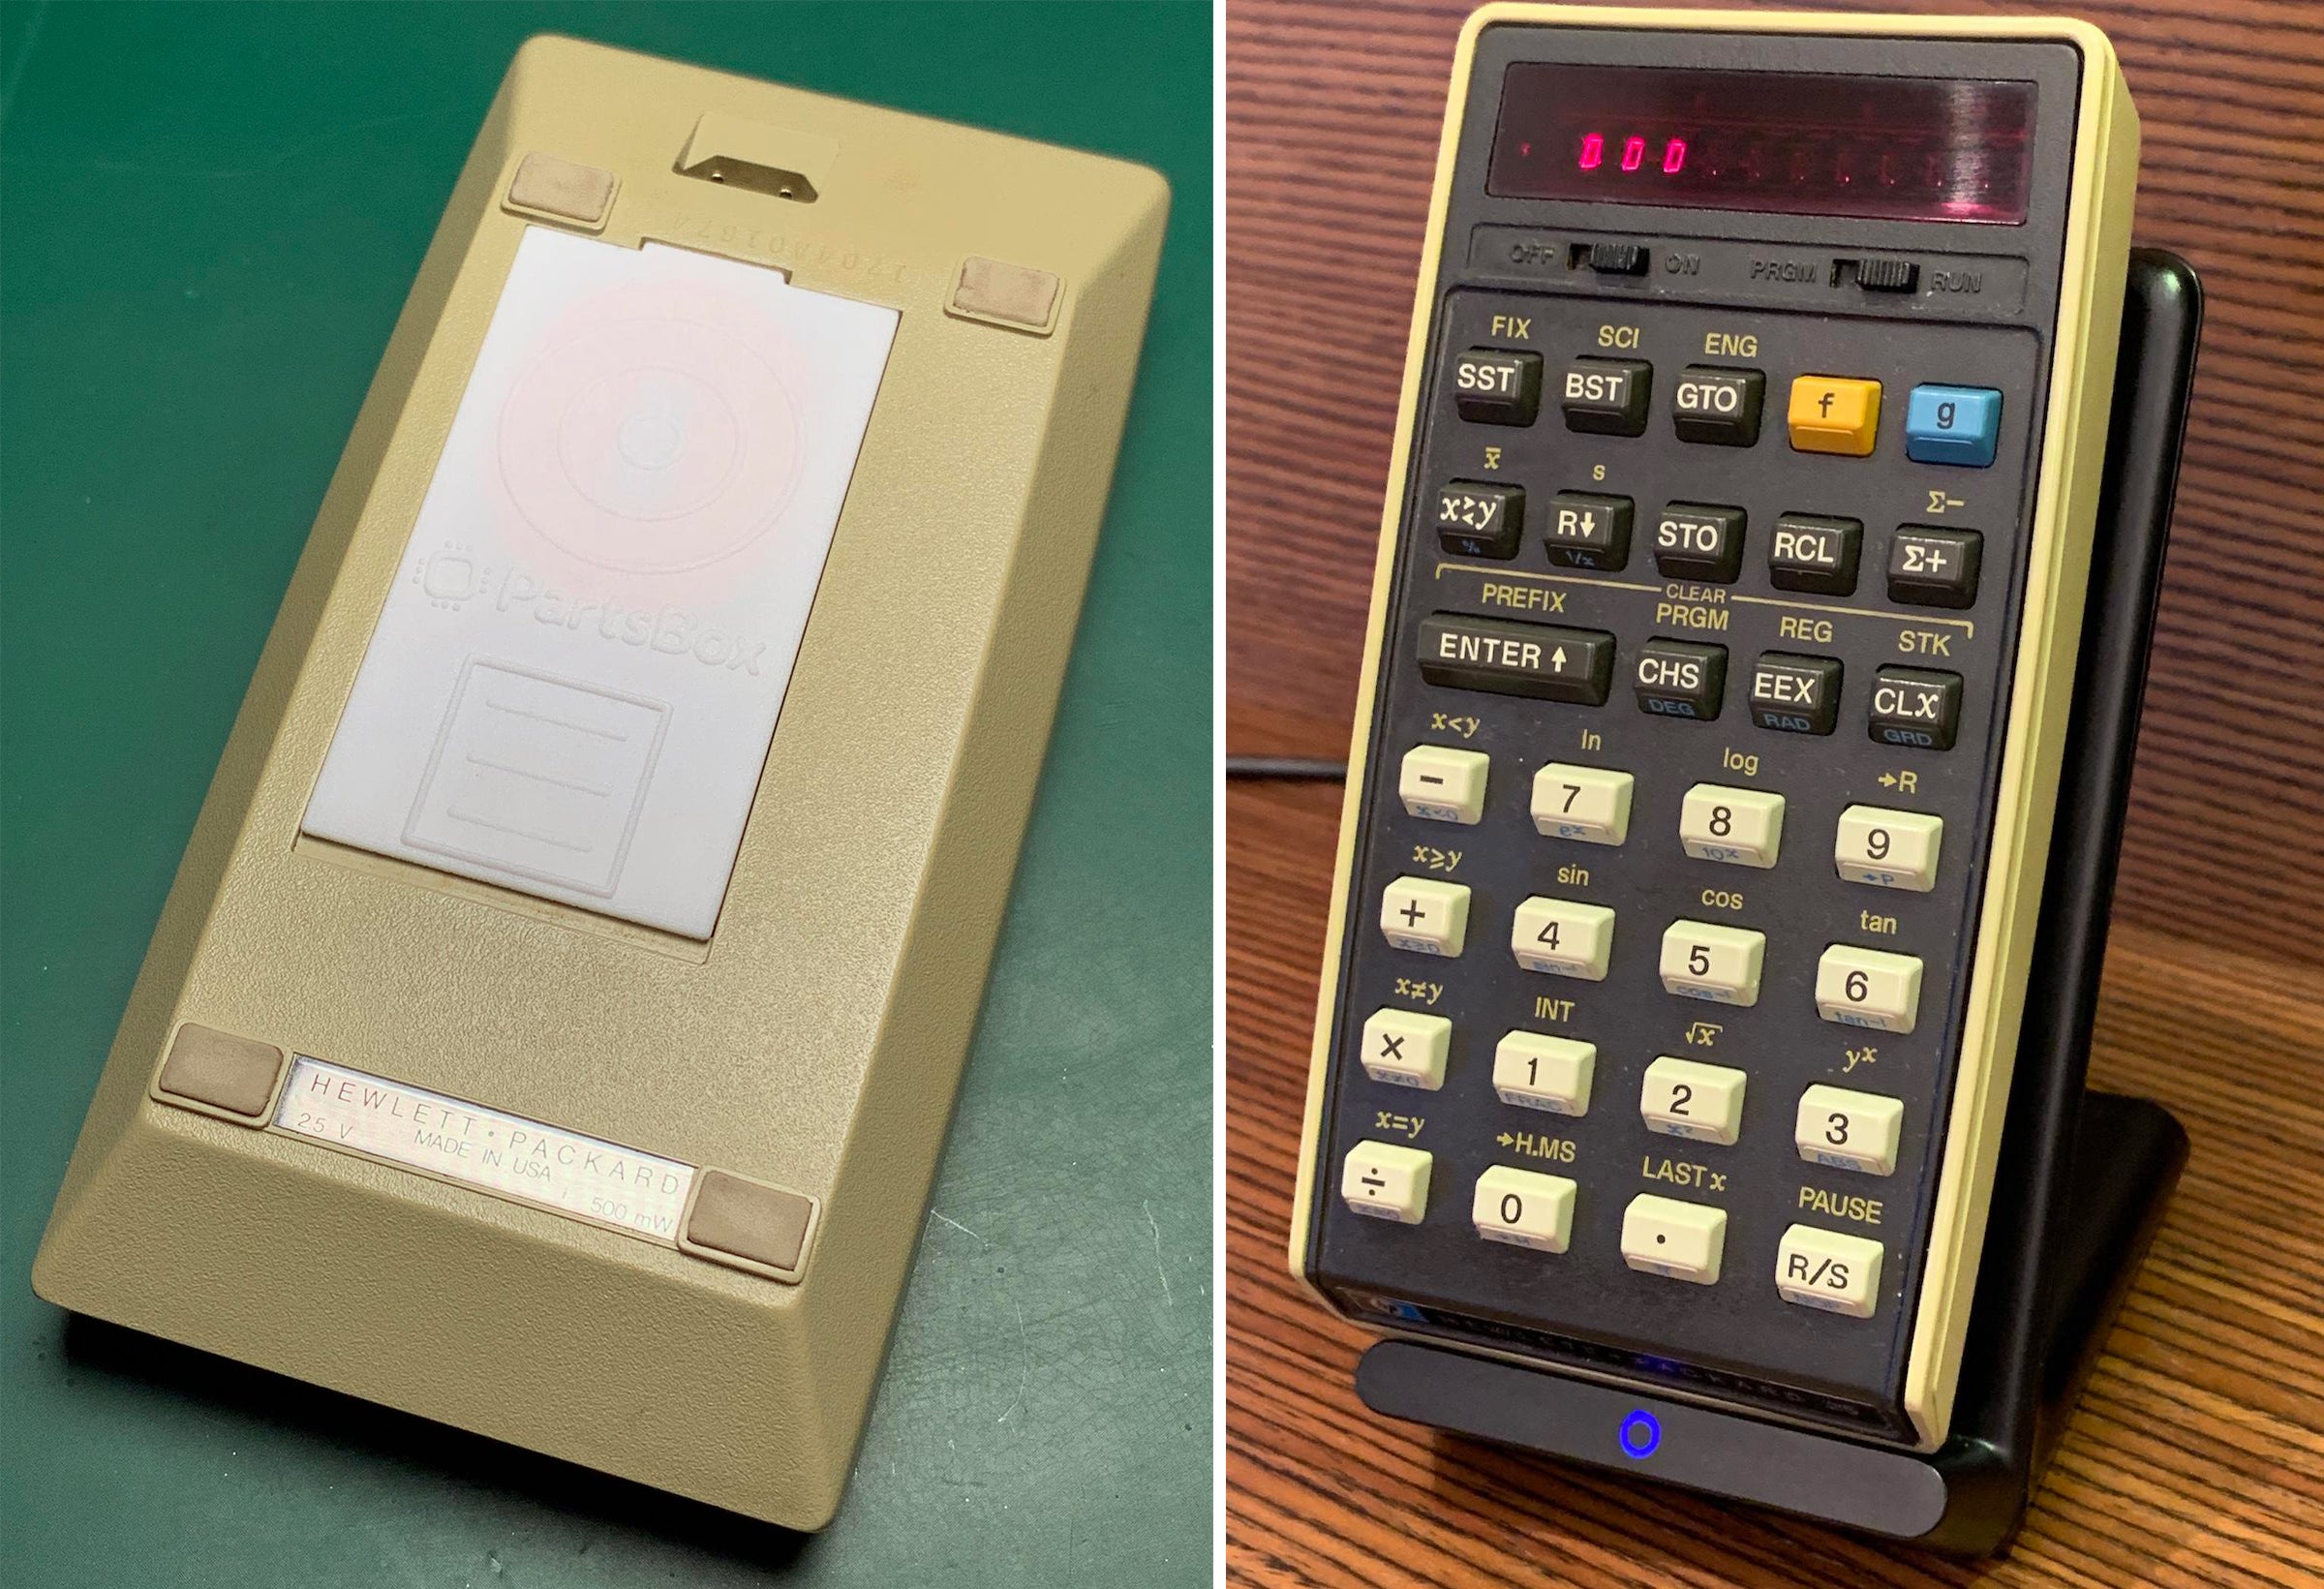 Adding Wireless Charging to a 46-Year-Old Calculator Shows Off Incredible Devotion to a Gadget